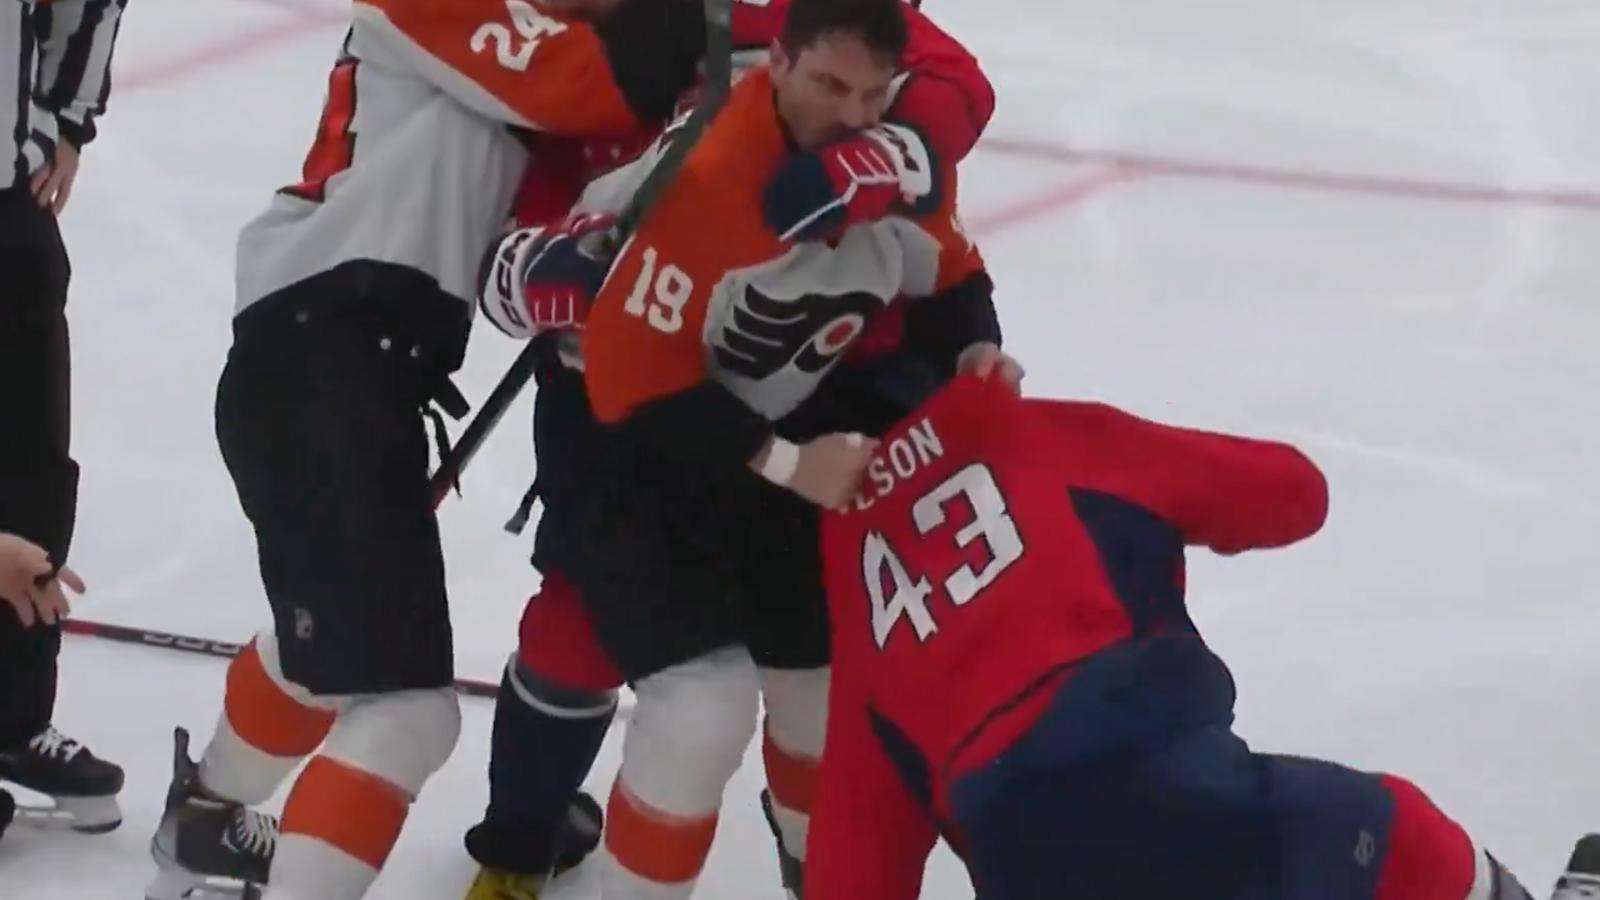 Former teammates Tom Wilson and Garnet Hathaway come to blows during game stoppage!